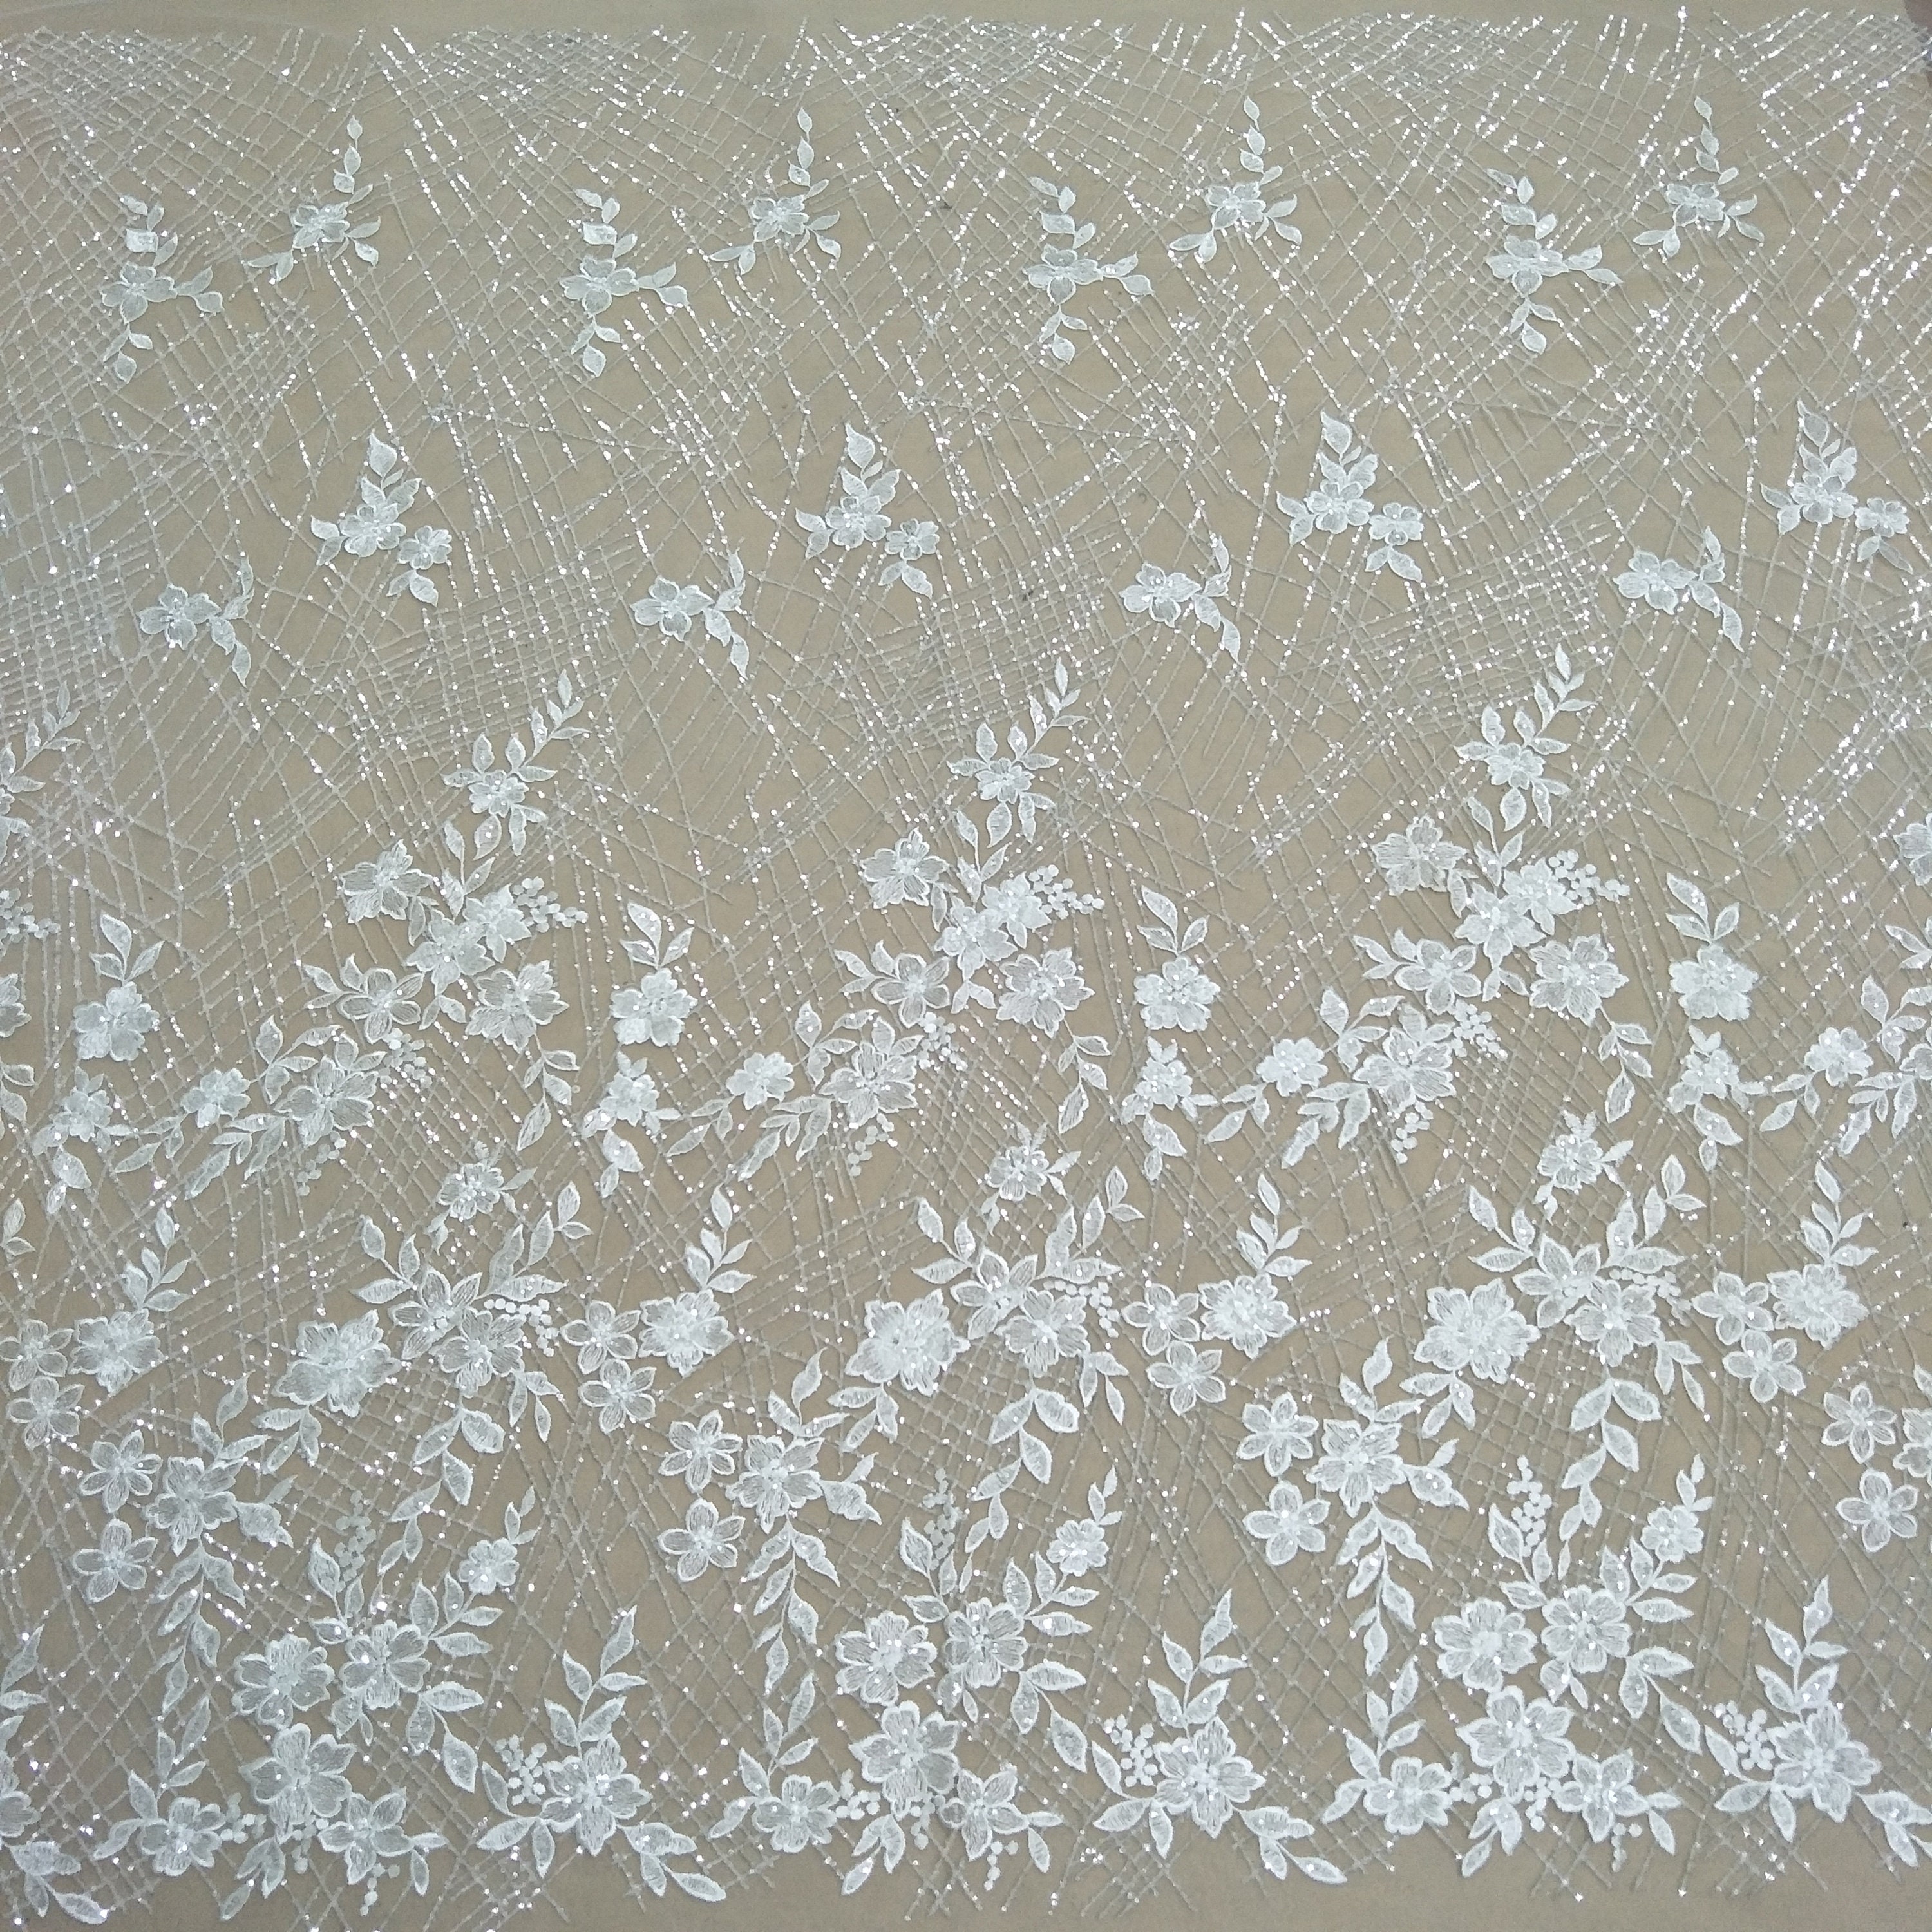 New Arrival Embroidery Lace Fabric Bridal Lace Fabric 130cm - Etsy